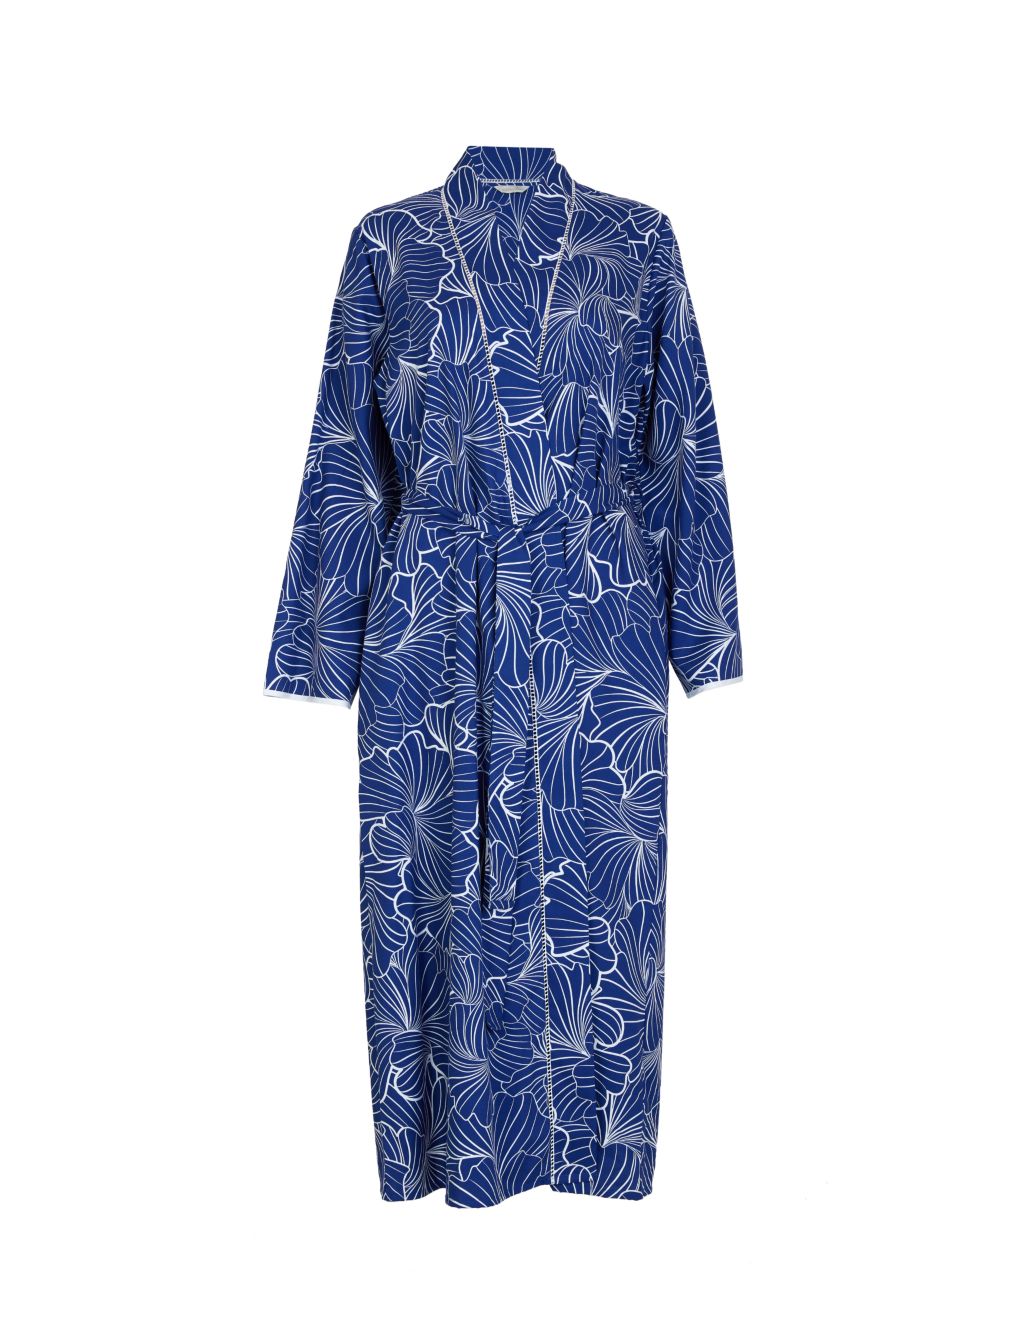 Cotton Modal Shell Print Dressing Gown image 2